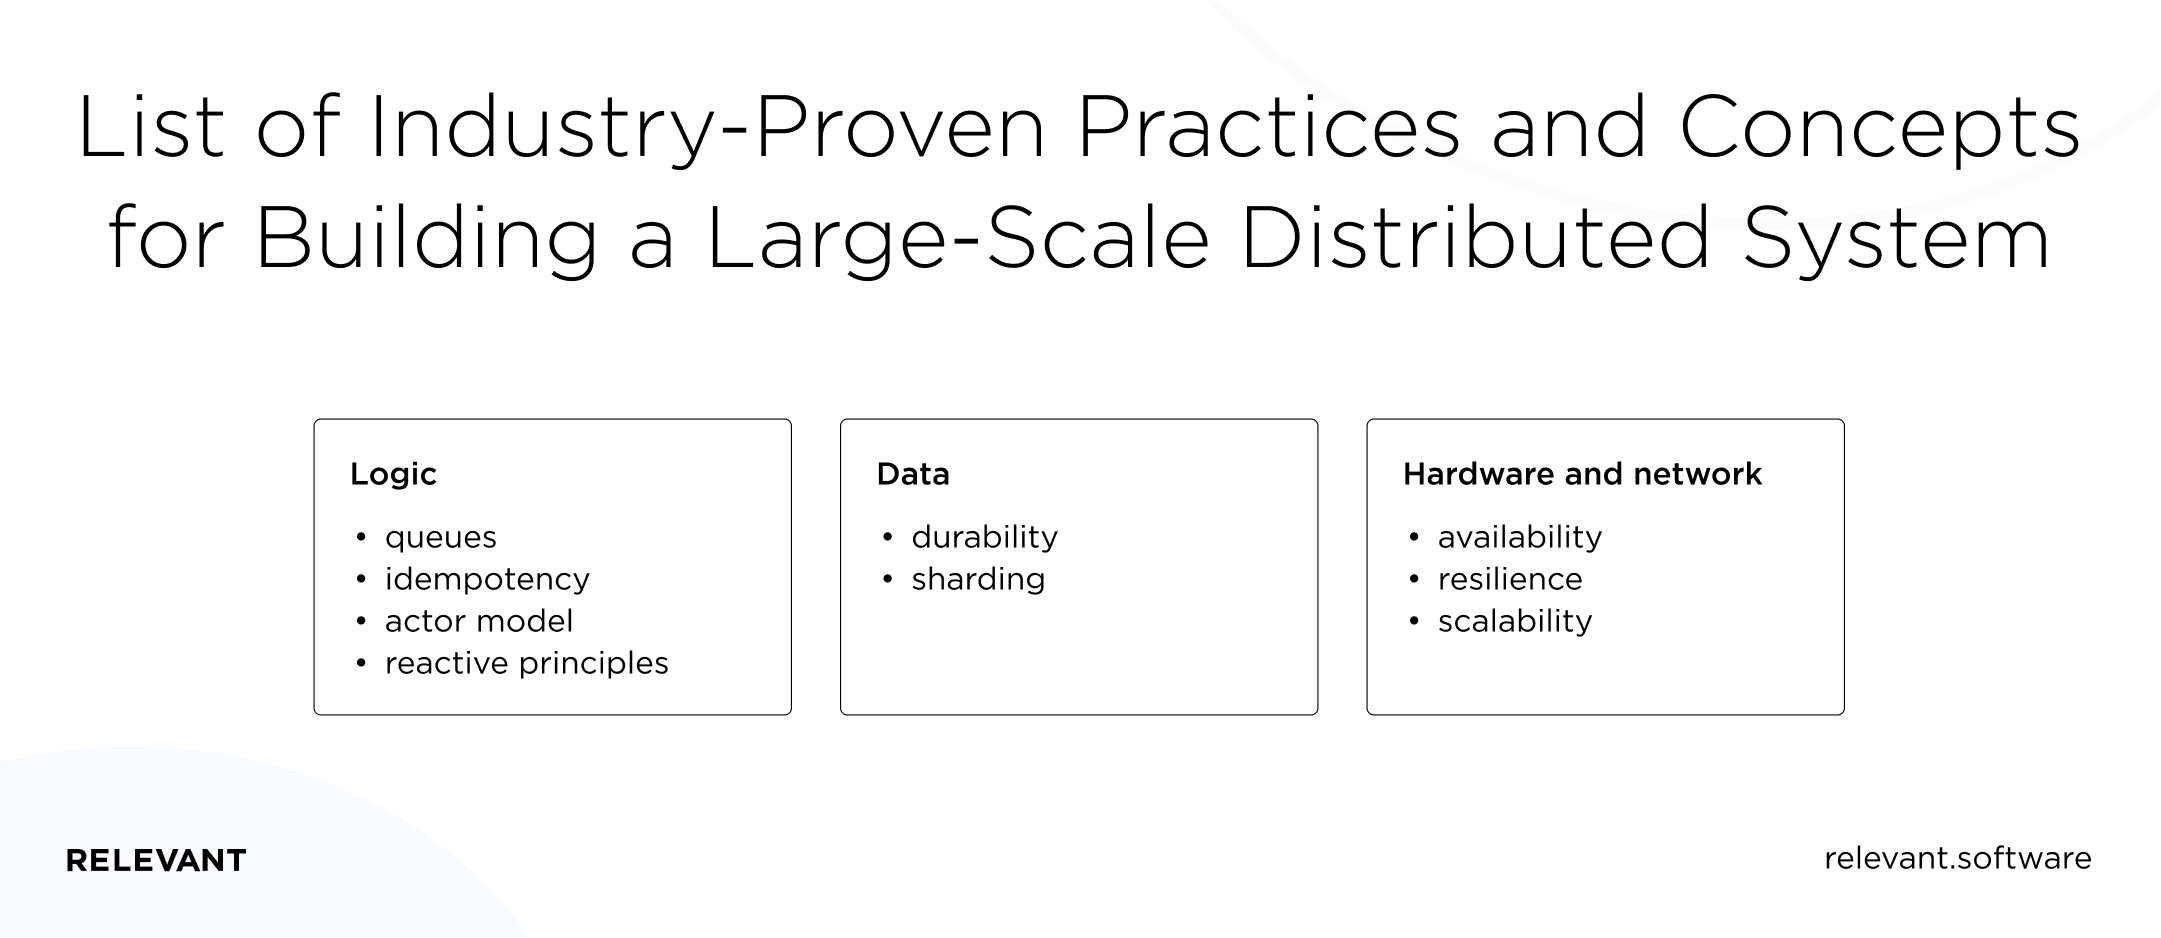 List of Industry-Proven Practices and Concepts for Building a Large-Scale Distributed System